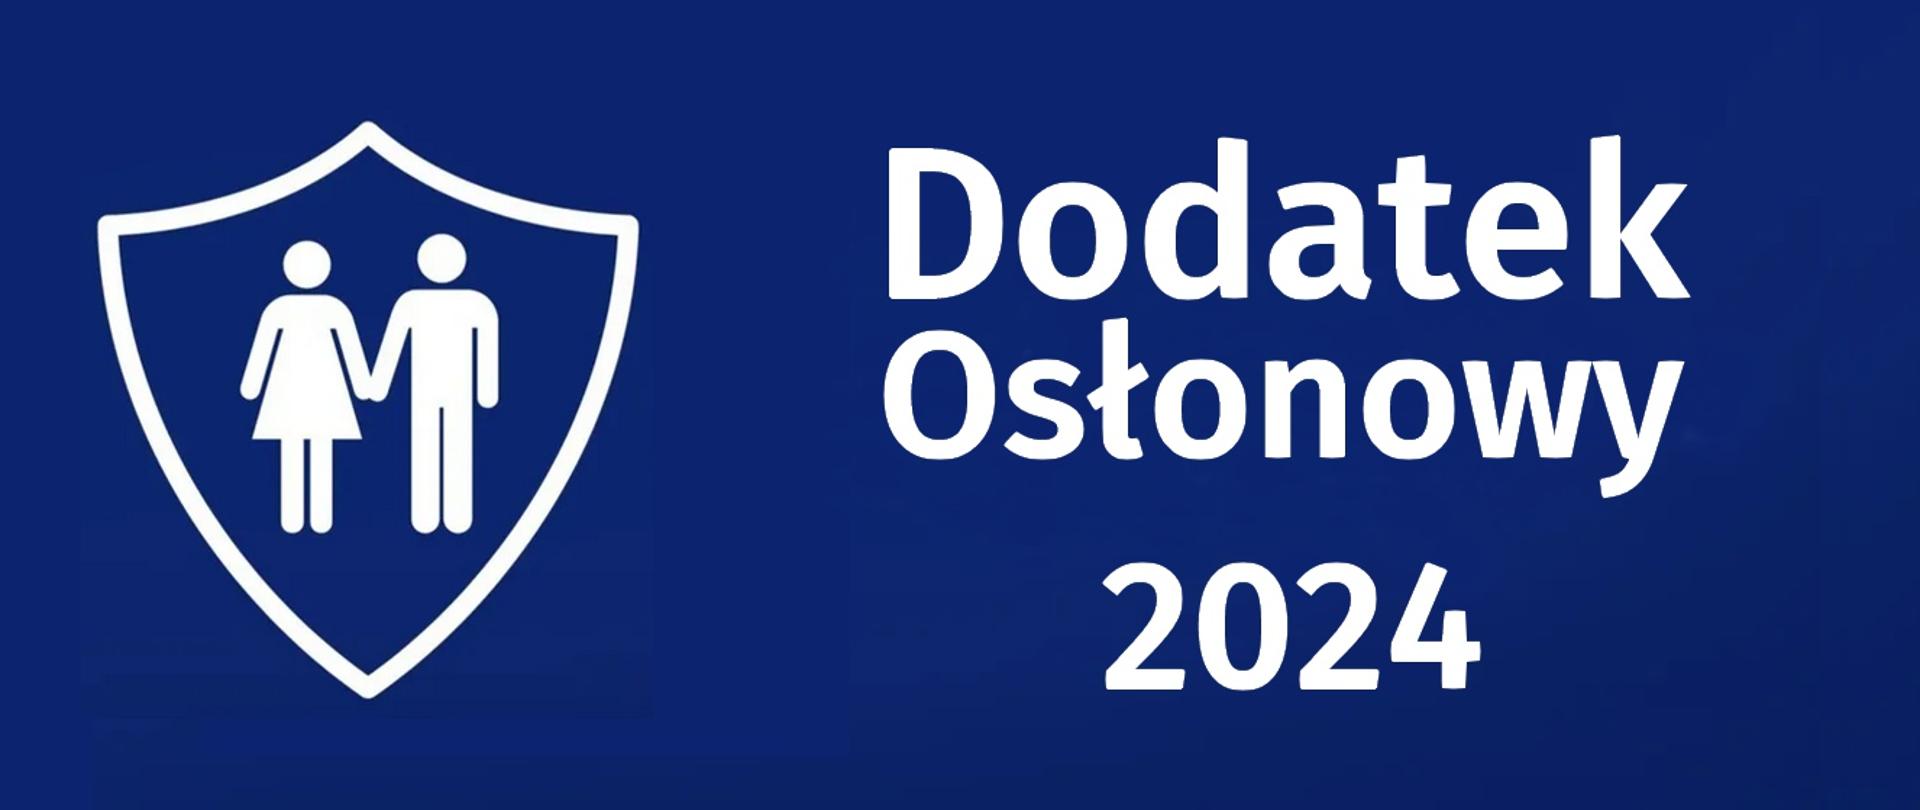 You are currently viewing Dodatek osłonowy 2024